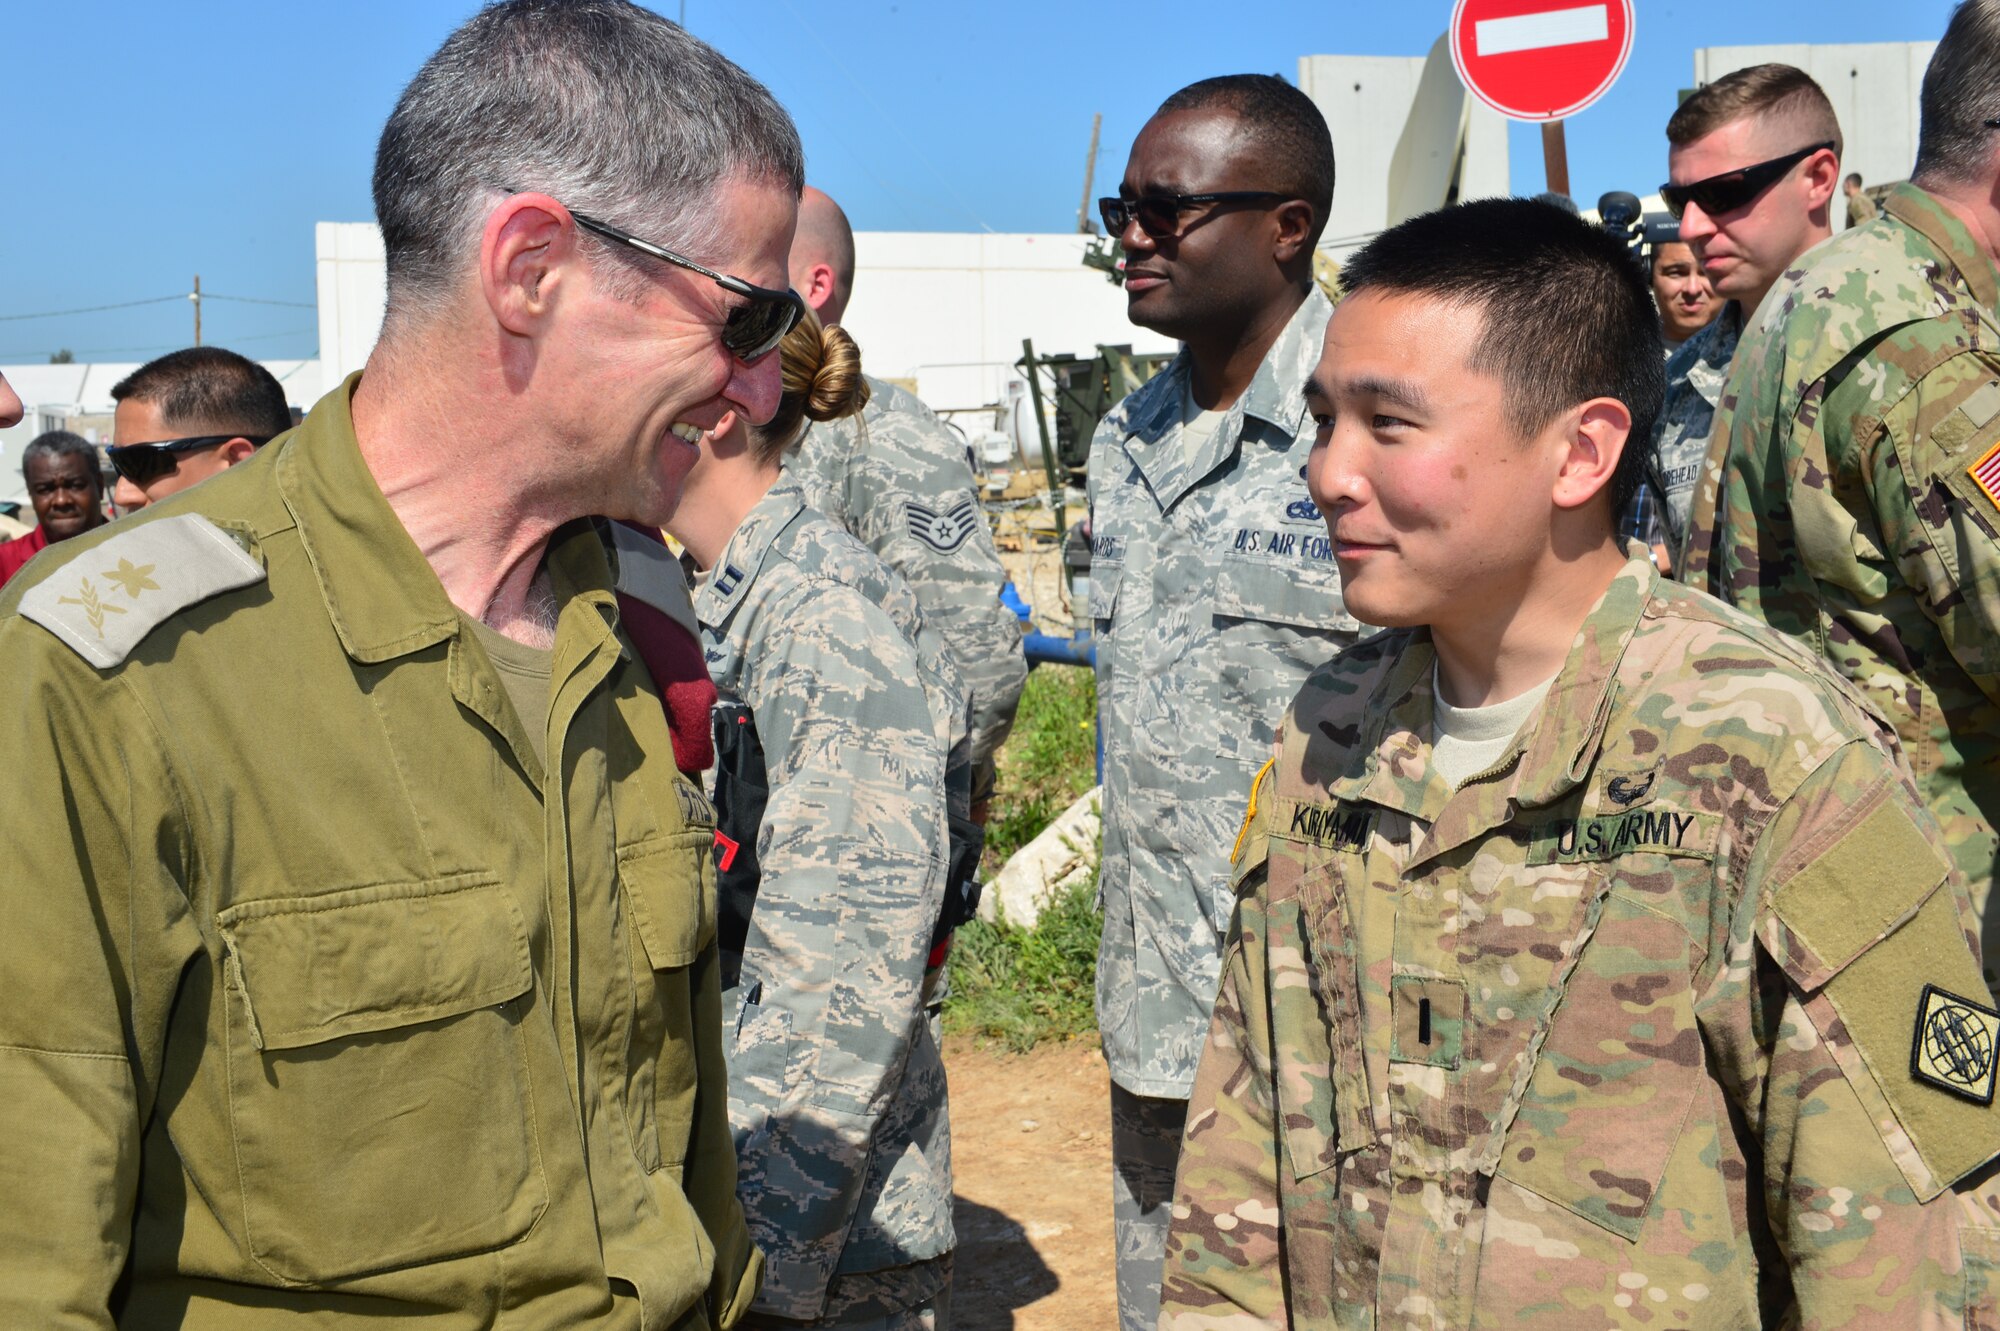 Lt. Gen. William Garrett, U.S. European Command deputy commander, meets 1st Lt. Kyle Kiriyama, 44th Expeditionary Signals Battalion platoon leader, during his visit of the exercise Juniper Cobra. Juniper Cobra is a biennial exercise held in Israel that trains on the ballistic missile defense, crisis resupply, foreign disaster response and foreign humanitarian assistance using computer simulations. Garrett recognized the efforts of three combat communications units working together for the first time in support of the exercise. (U.S. Air Force photo by Staff Sgt. Stephanie Longoria/Released)